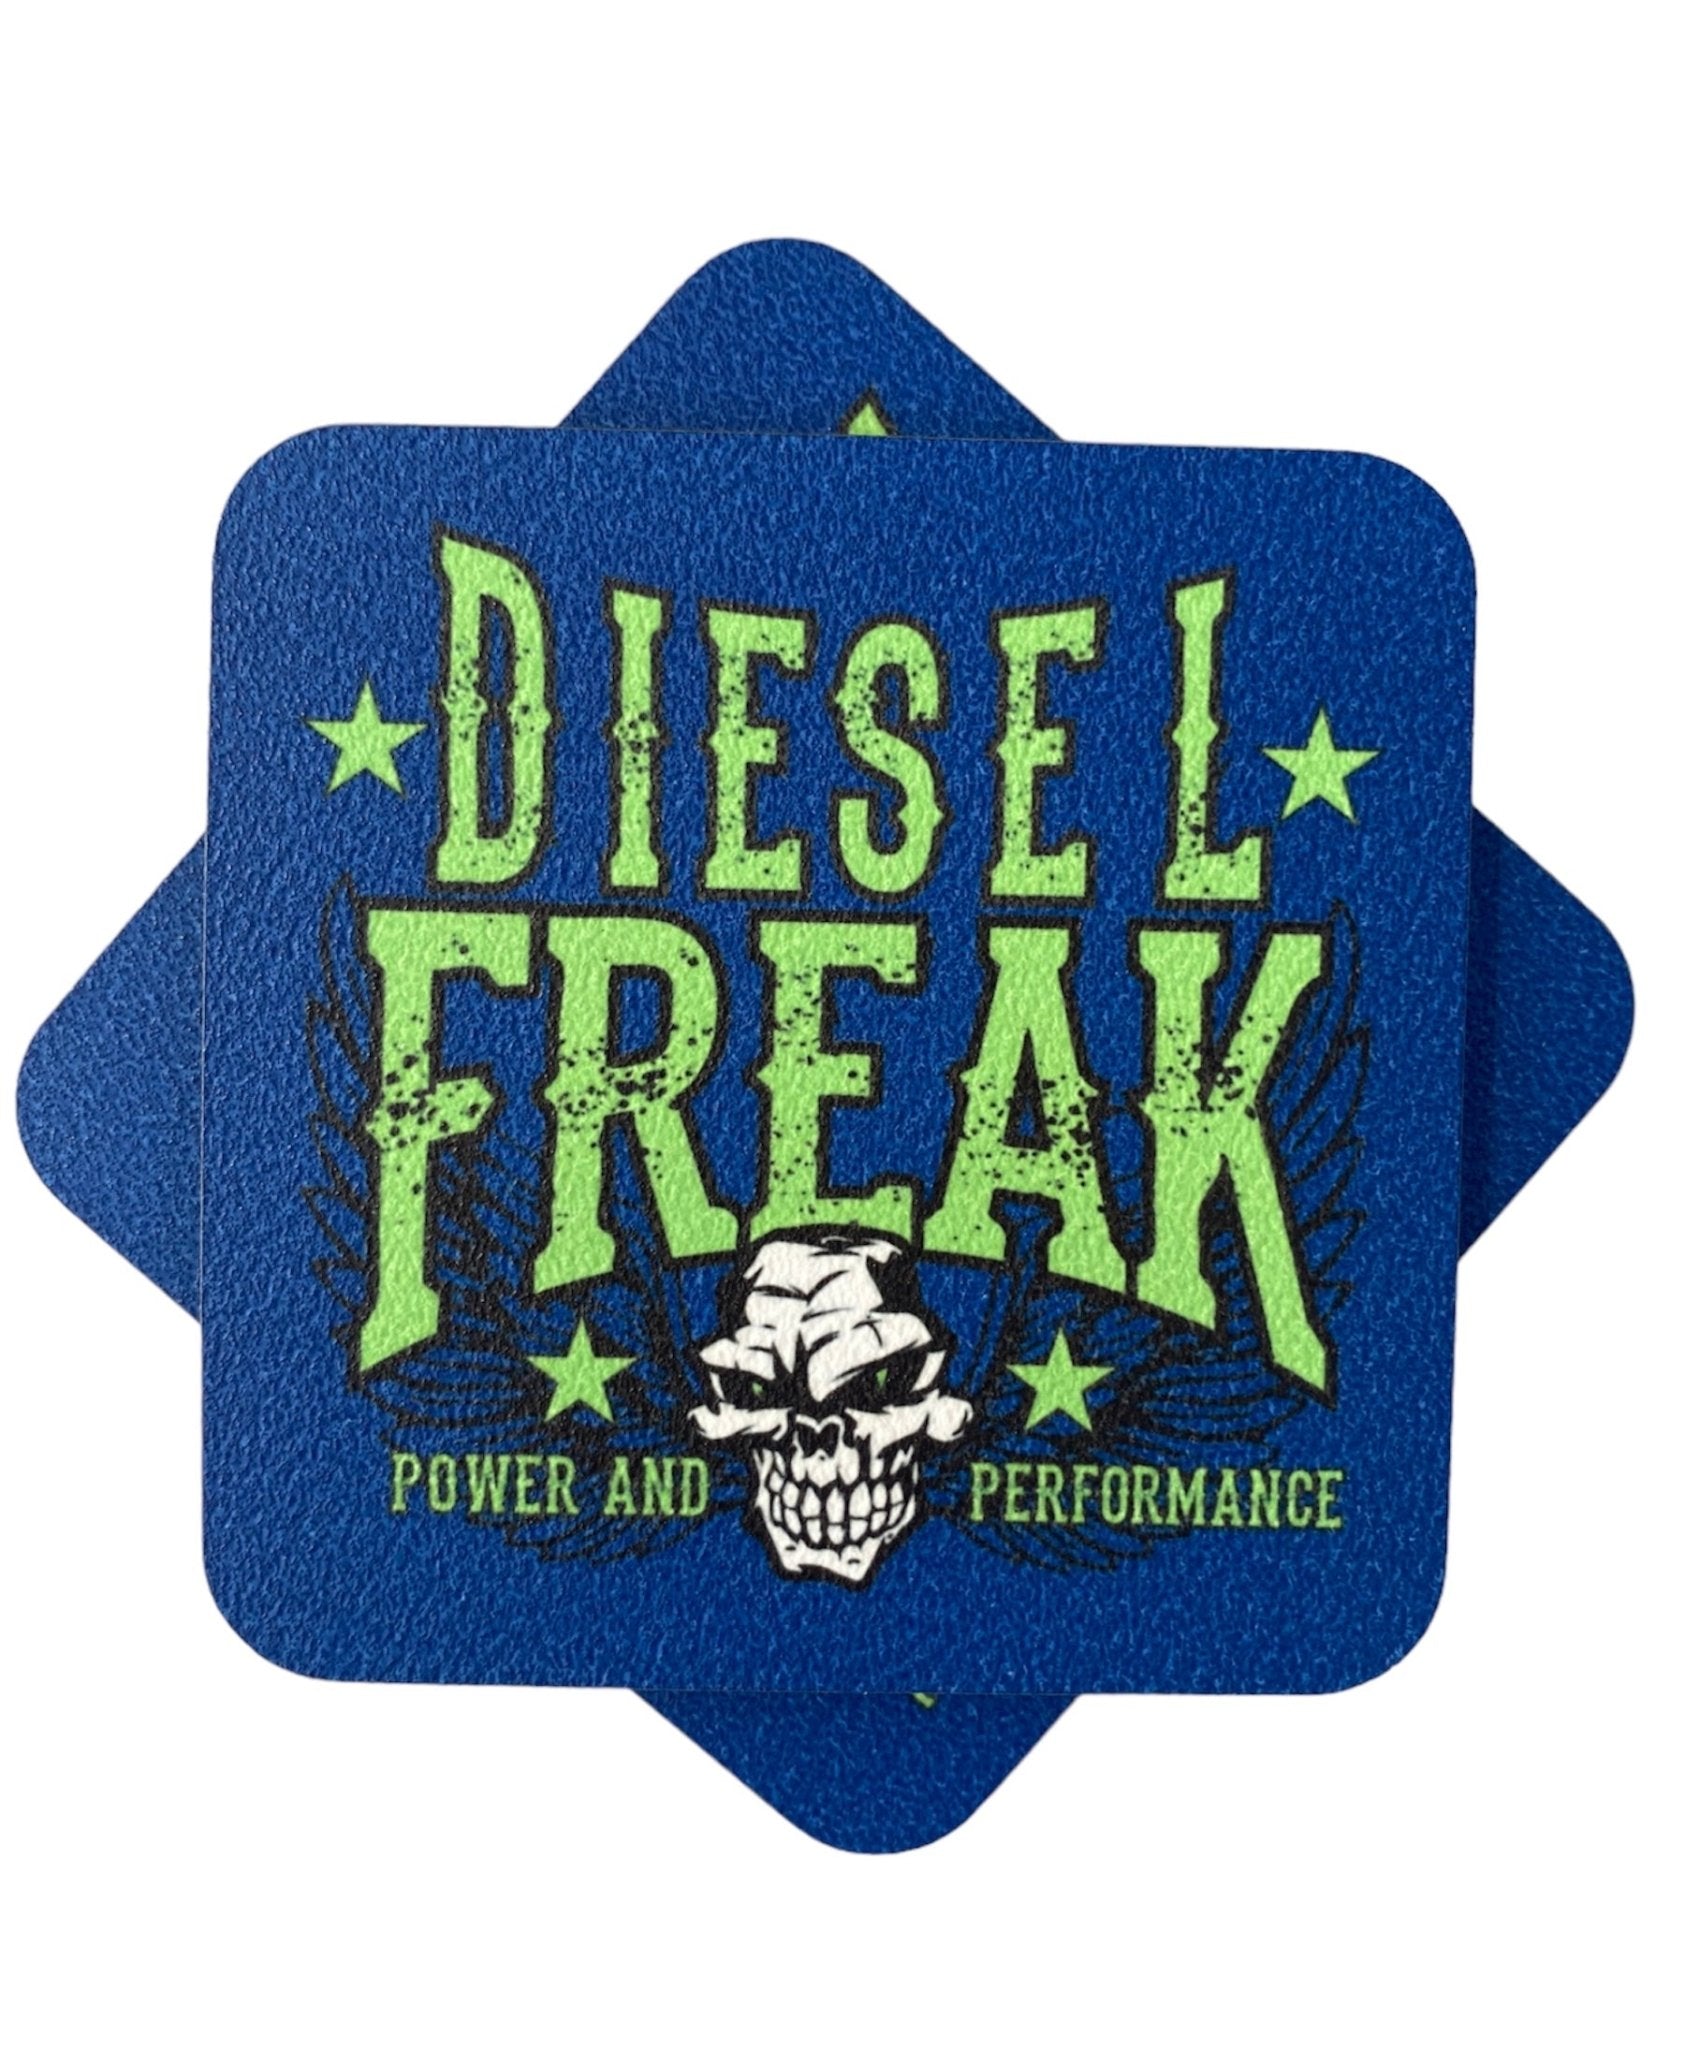 Power and Performance Textured Coaster